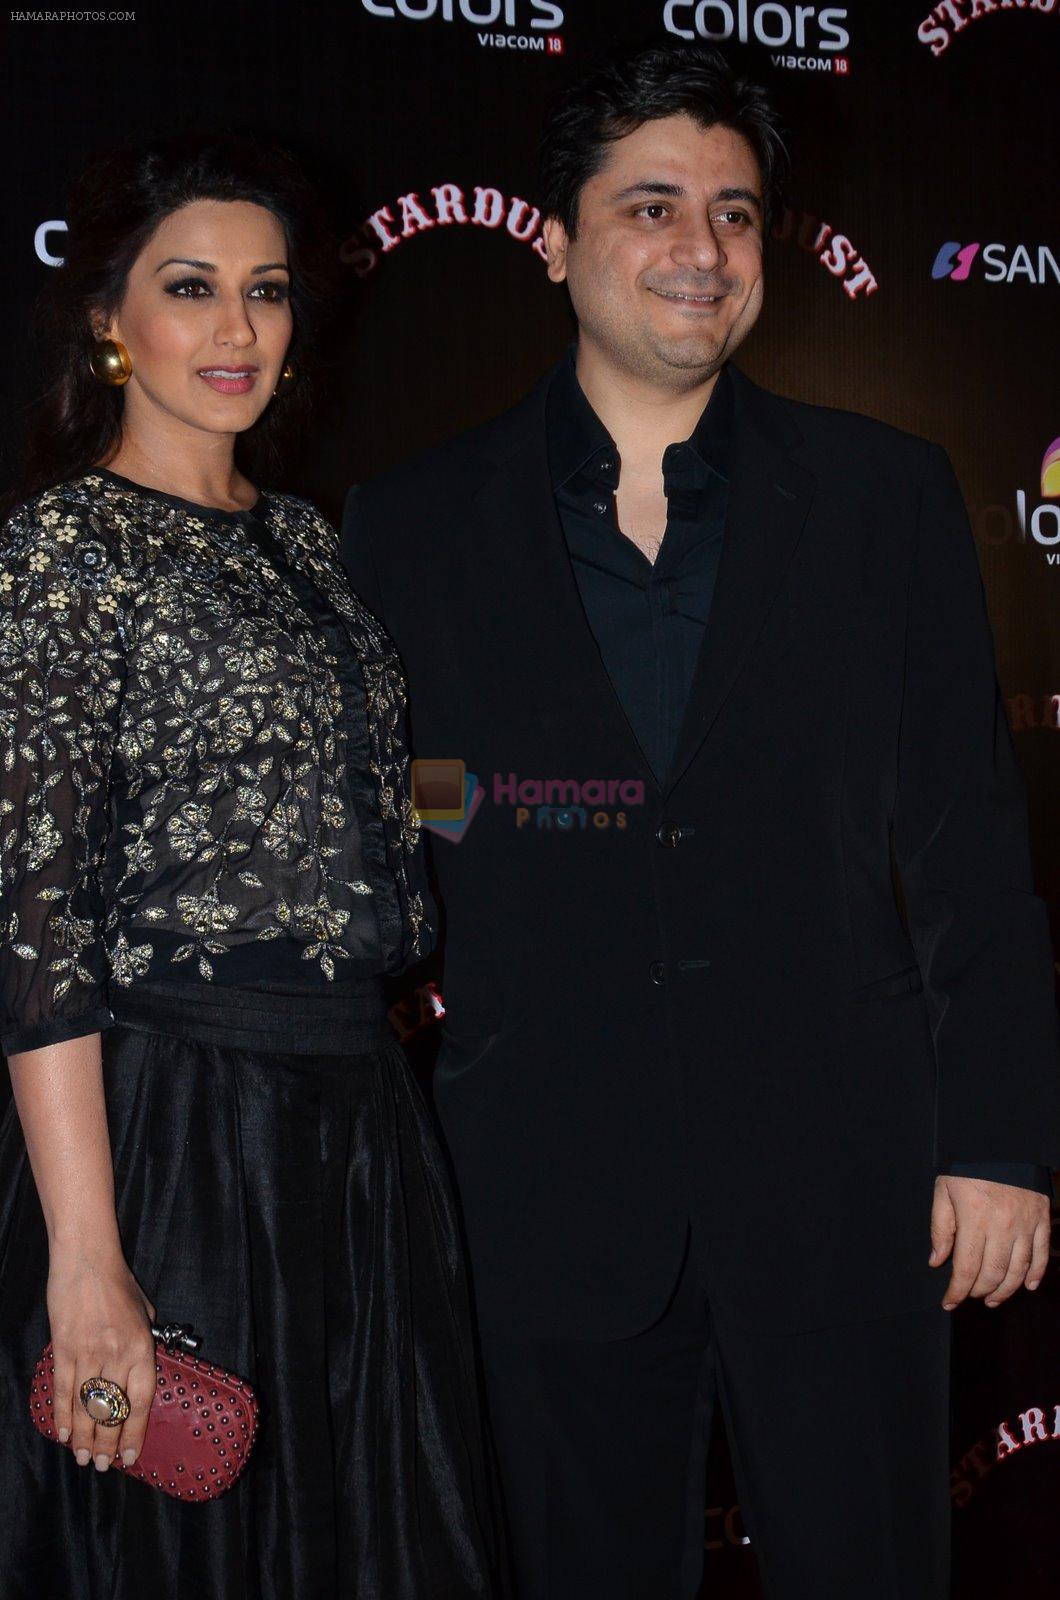 Sonali bendre, Goldie Behl at Stardust Awards 2014 in Mumbai on 14th Dec 2014